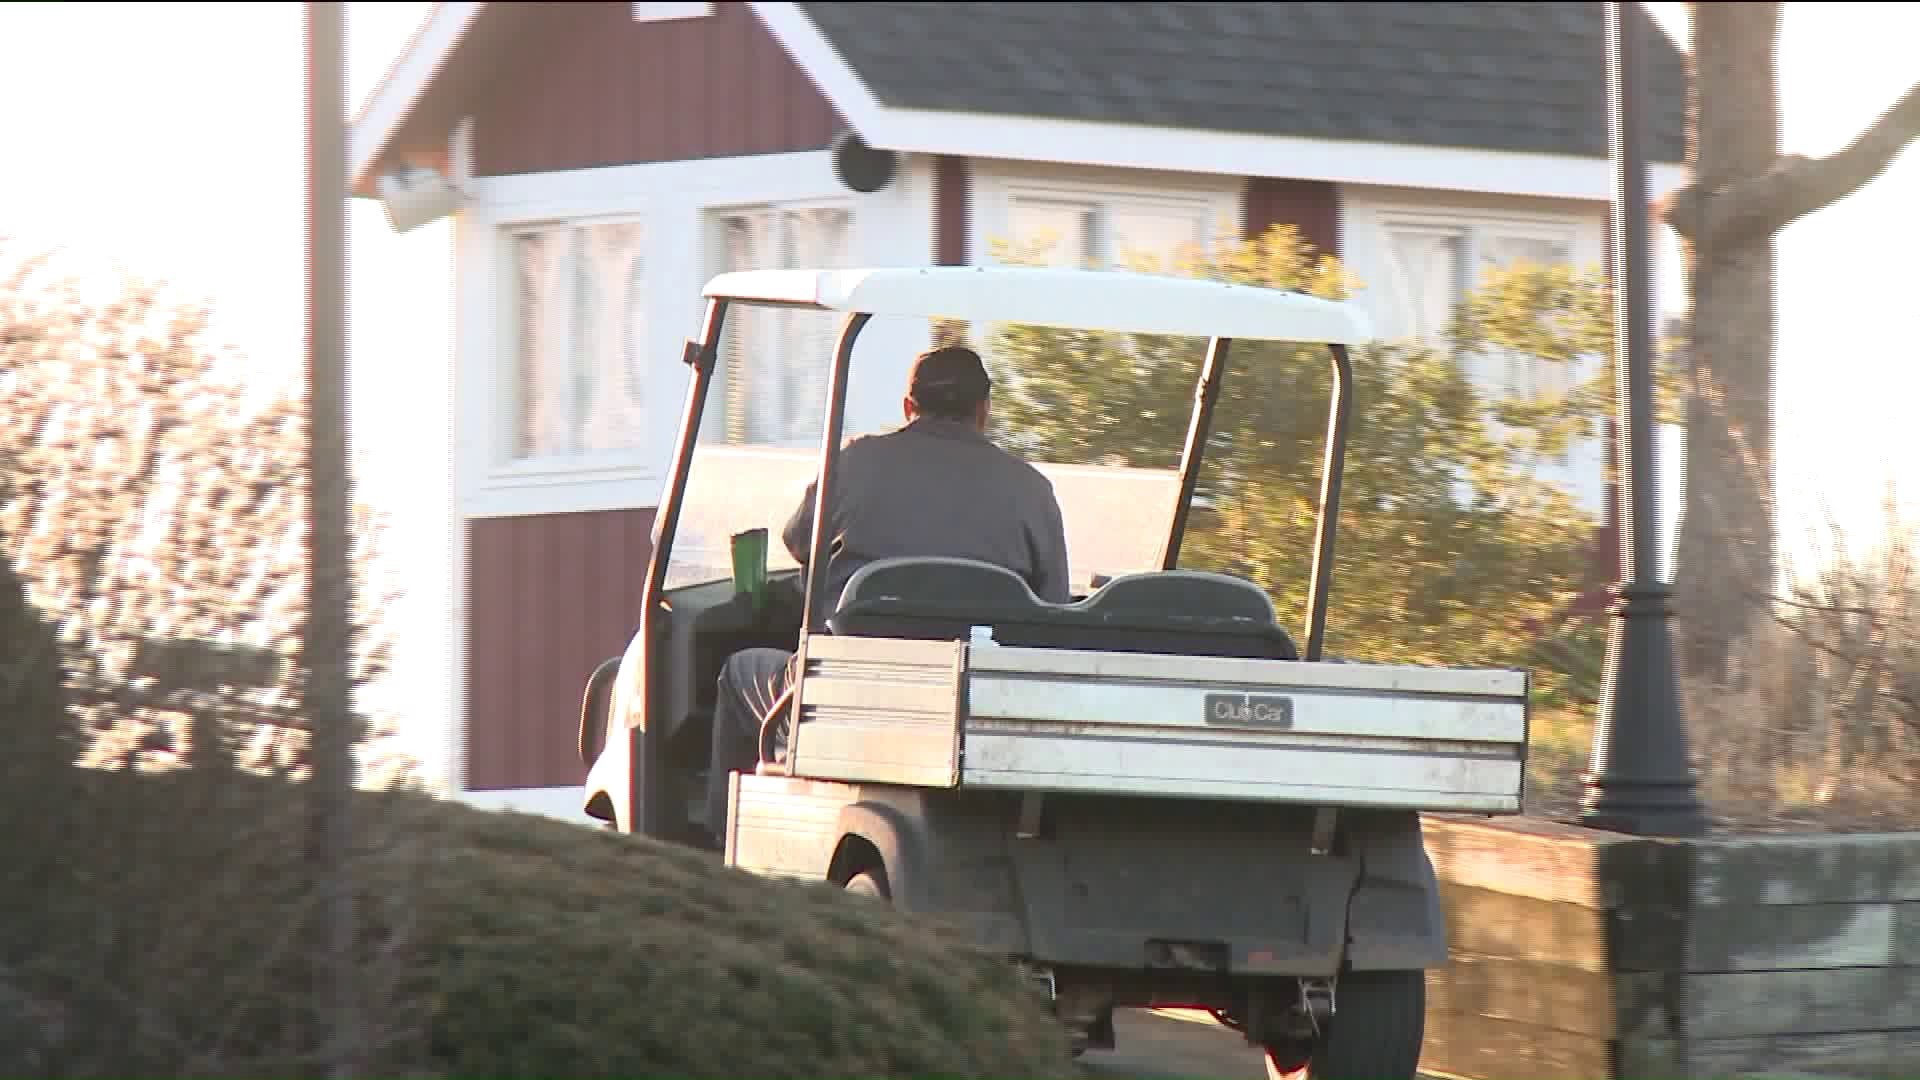 Stanley Golf Course opens for the season